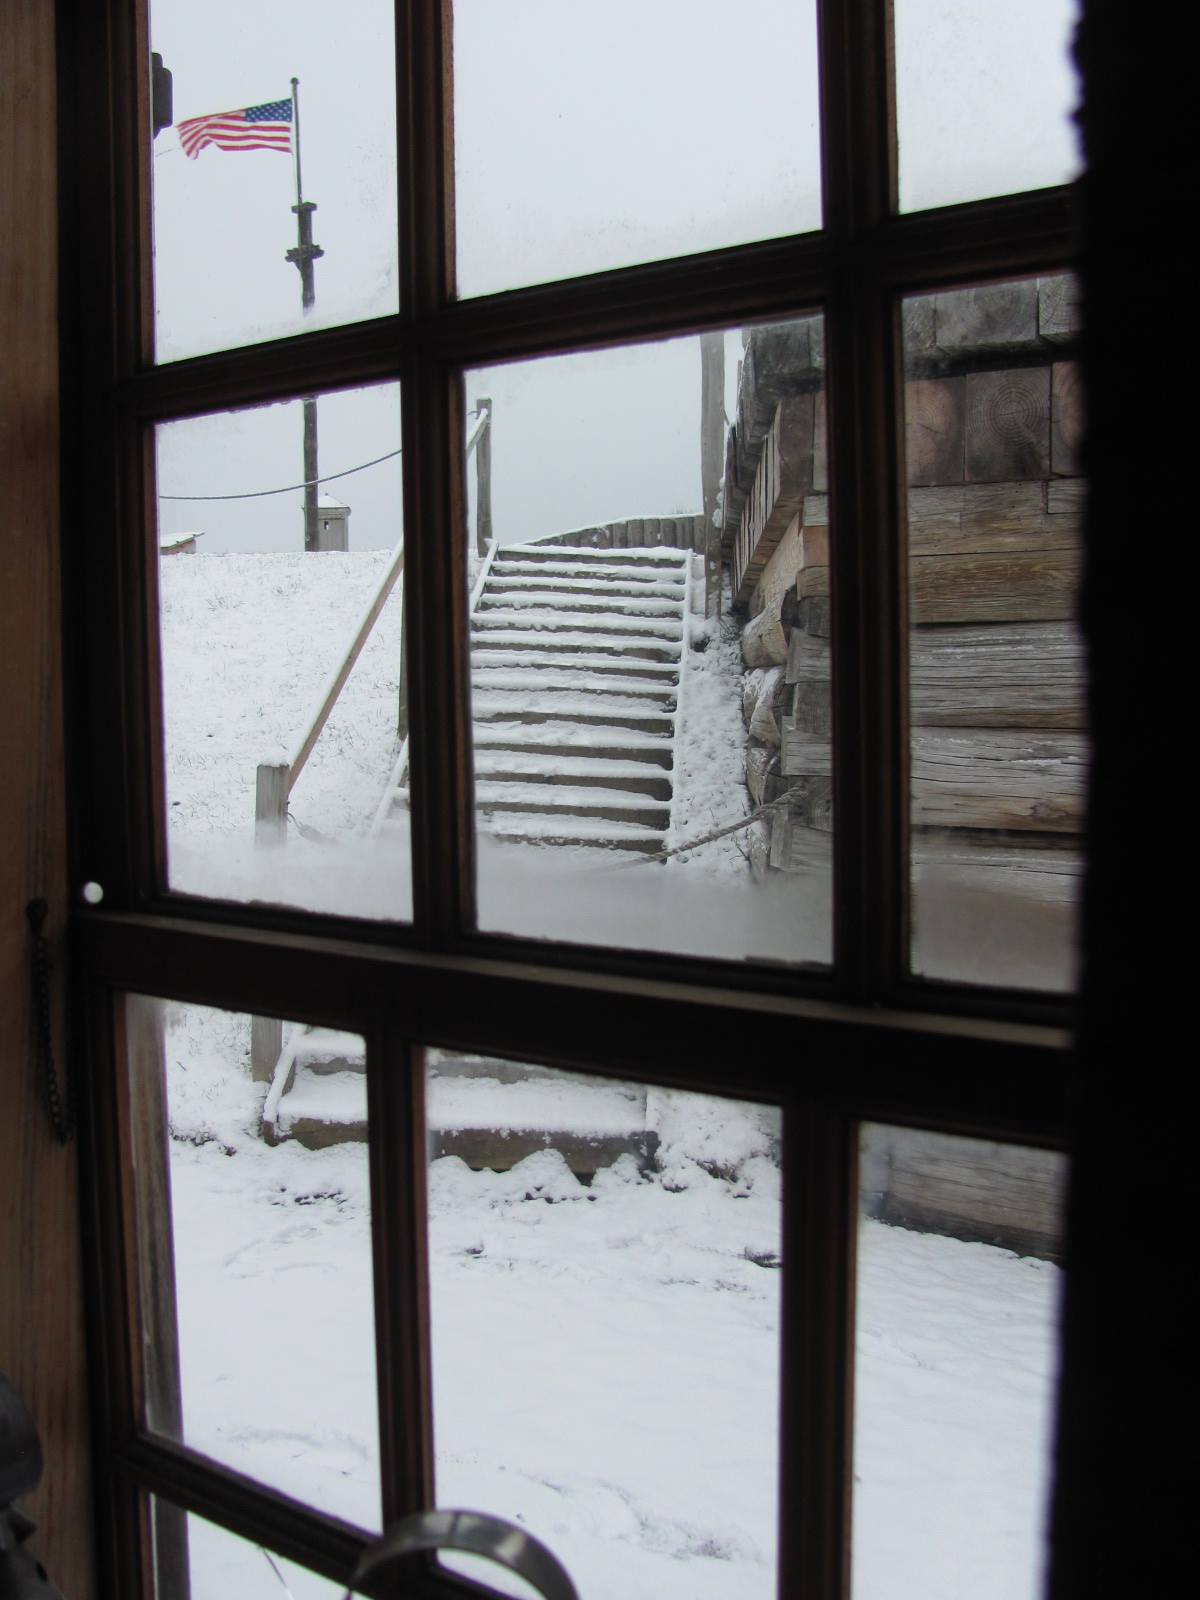 A view of snowy stairs through a window pane. An American flag flies at the top of the stairs.